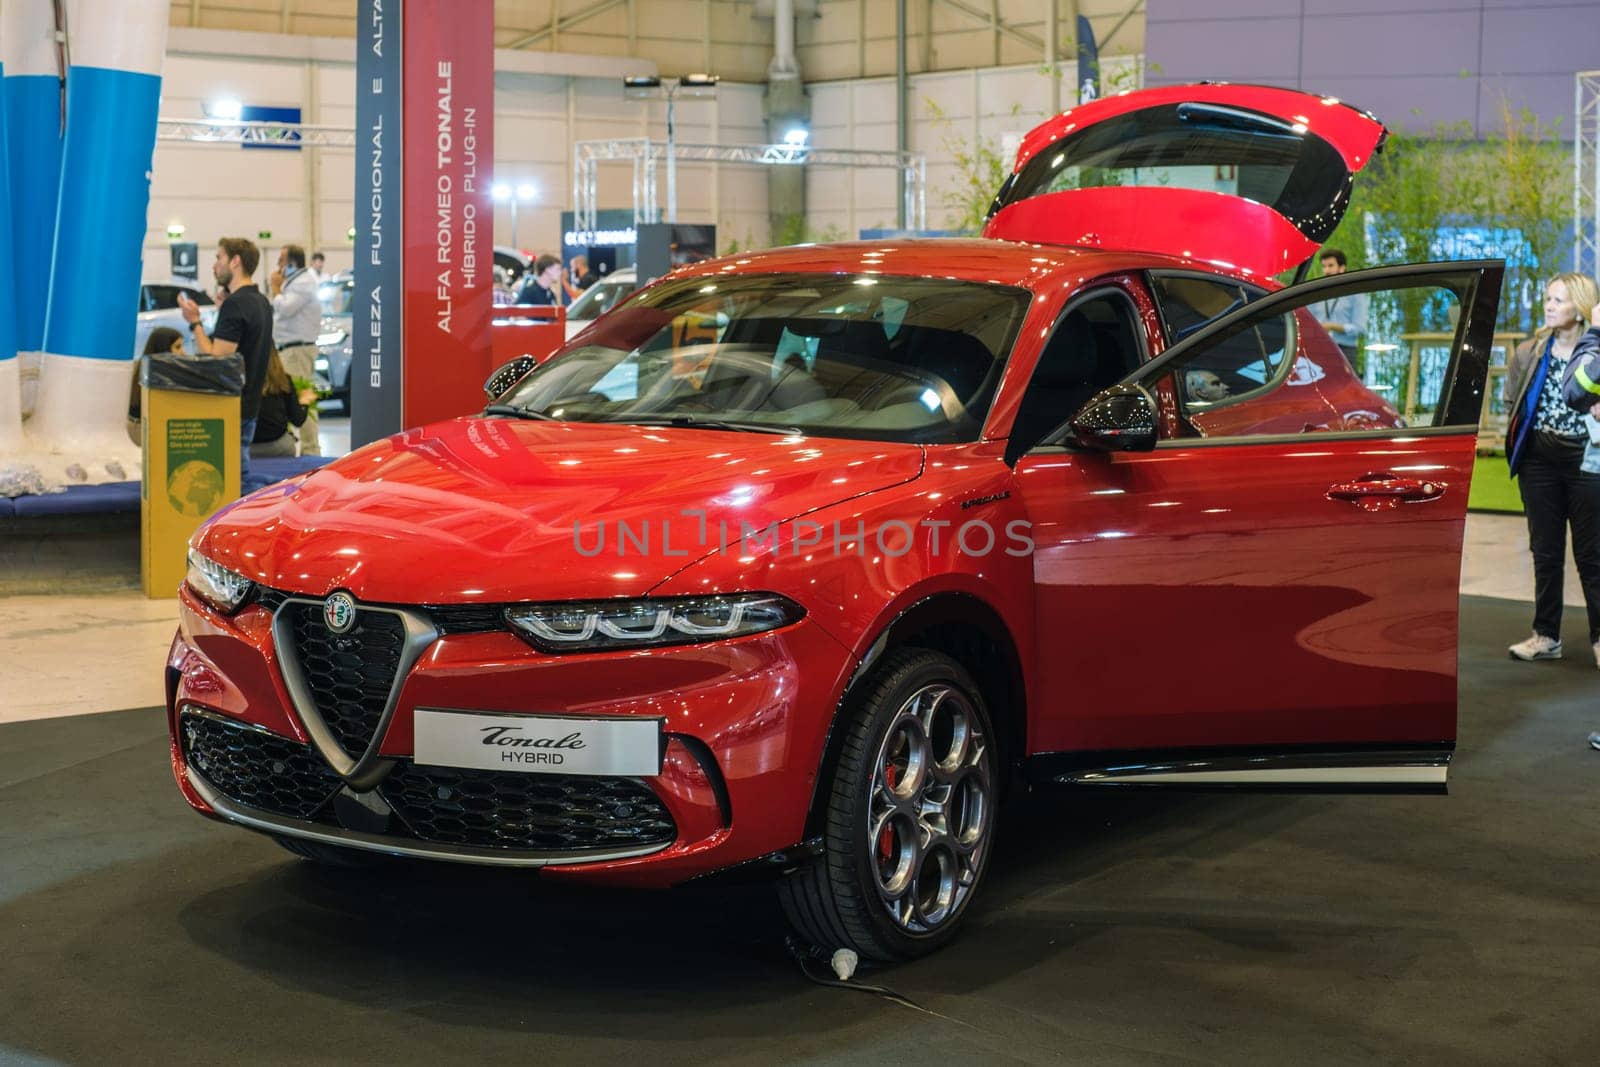 Lisbon, Portugal - May 12, 2023: Alfa Romeo Tonale electric hybrid car on display at ECAR SHOW - Hybrid and Electric Motor Show